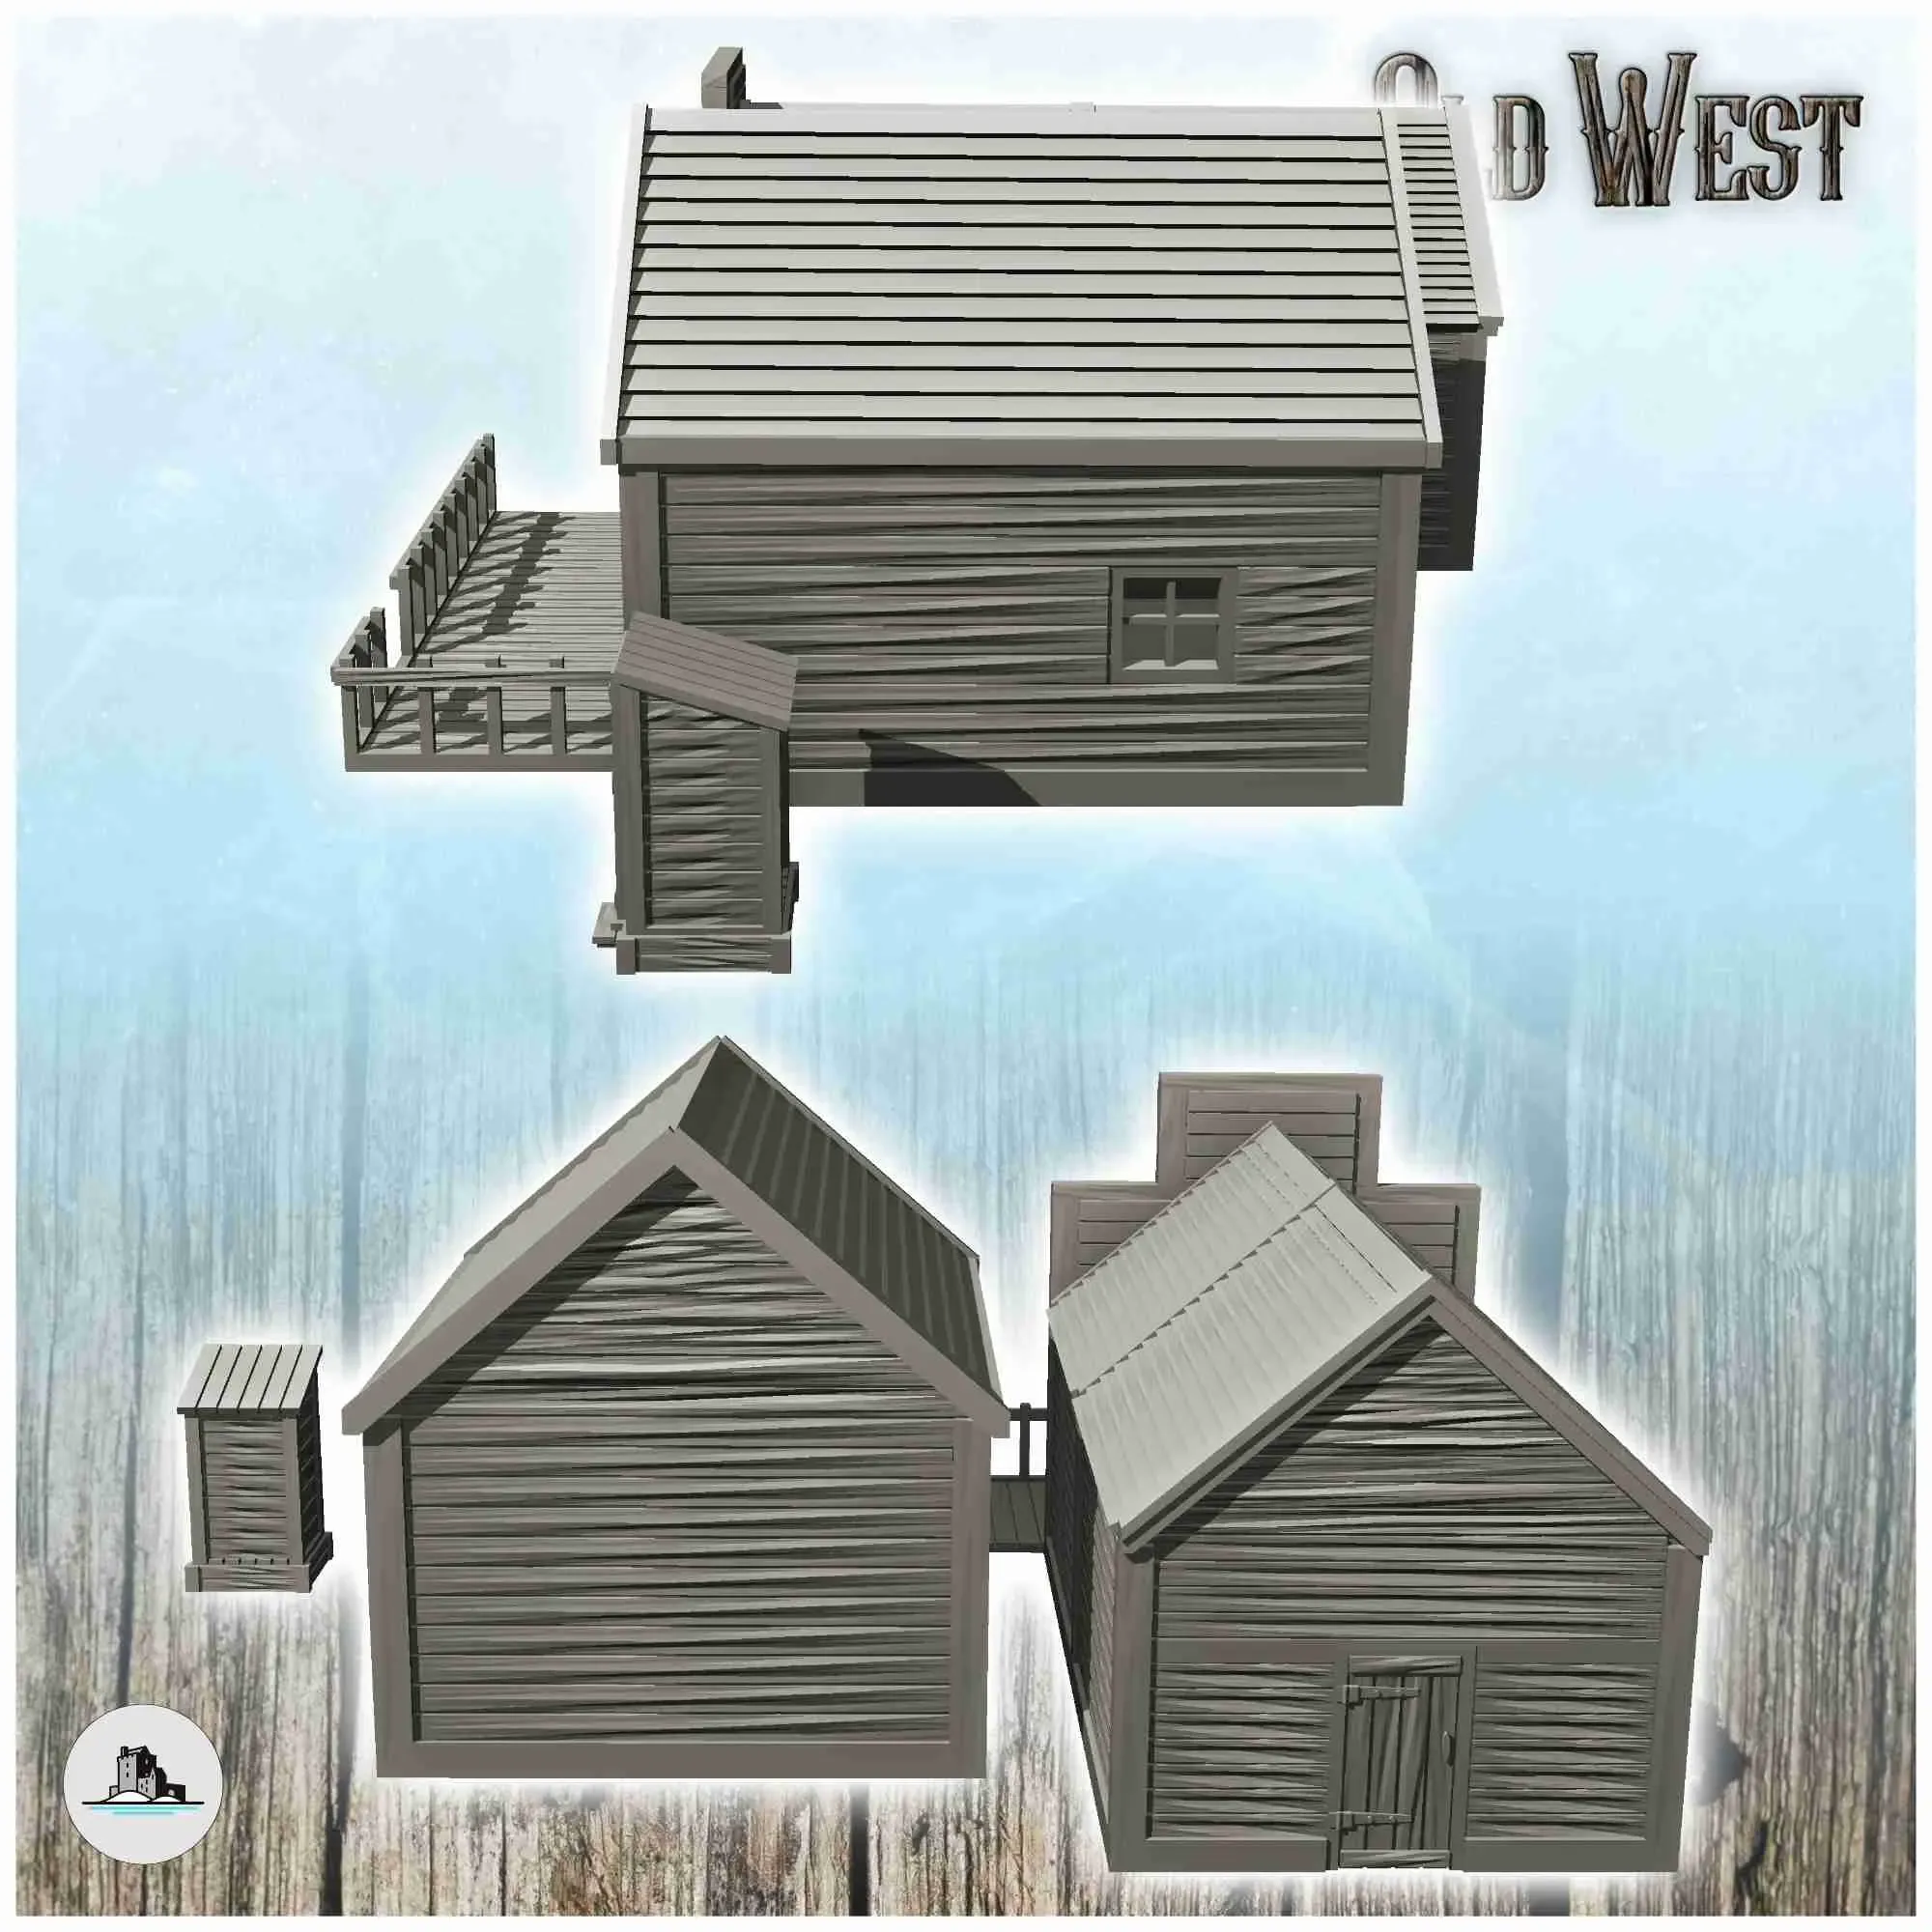 Set of western houses with toilet cabins (13) - miniatures A